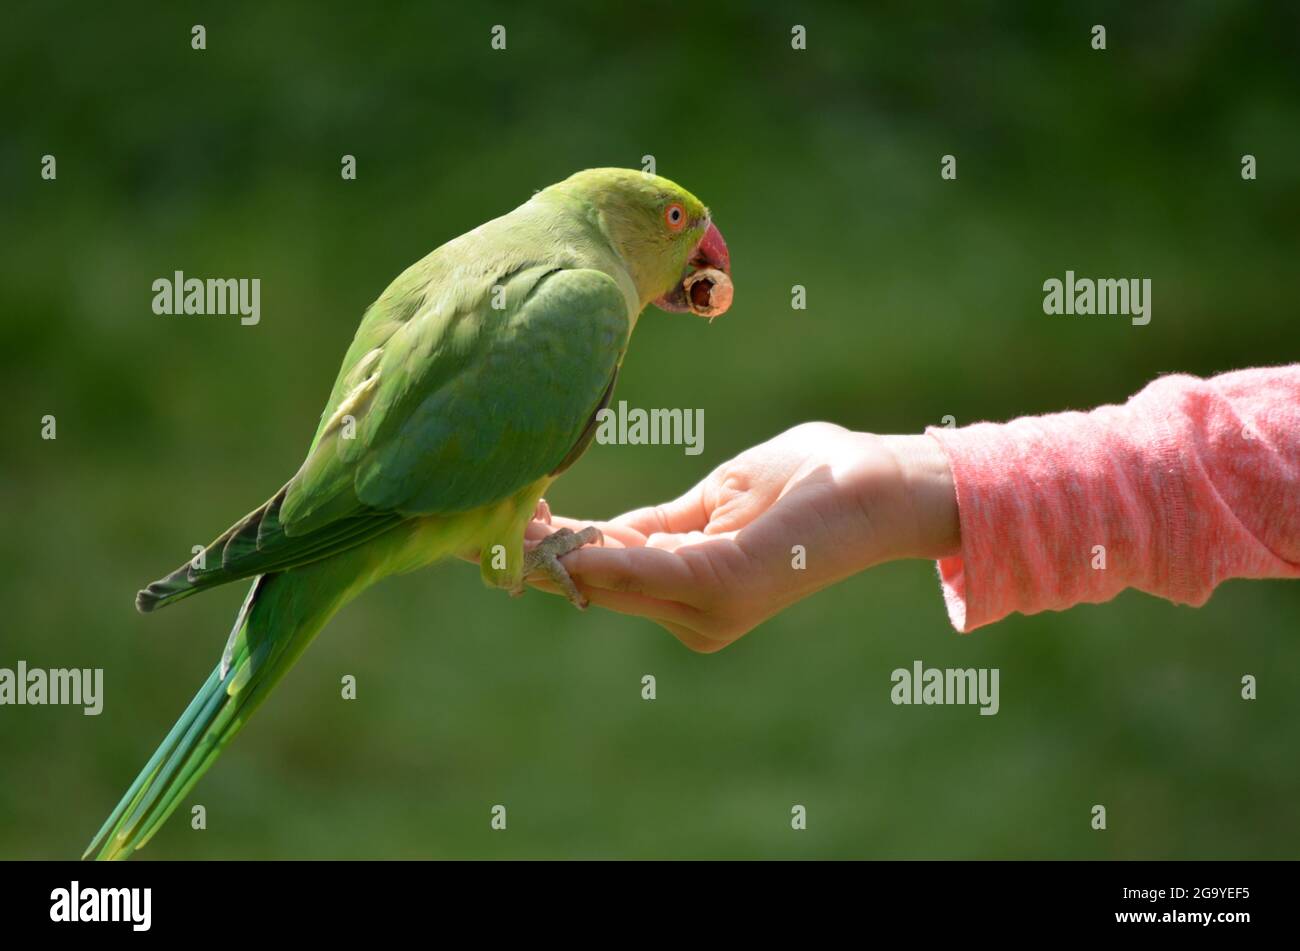 Parrot eating bird seed from a girl's hand, UK Stock Photo